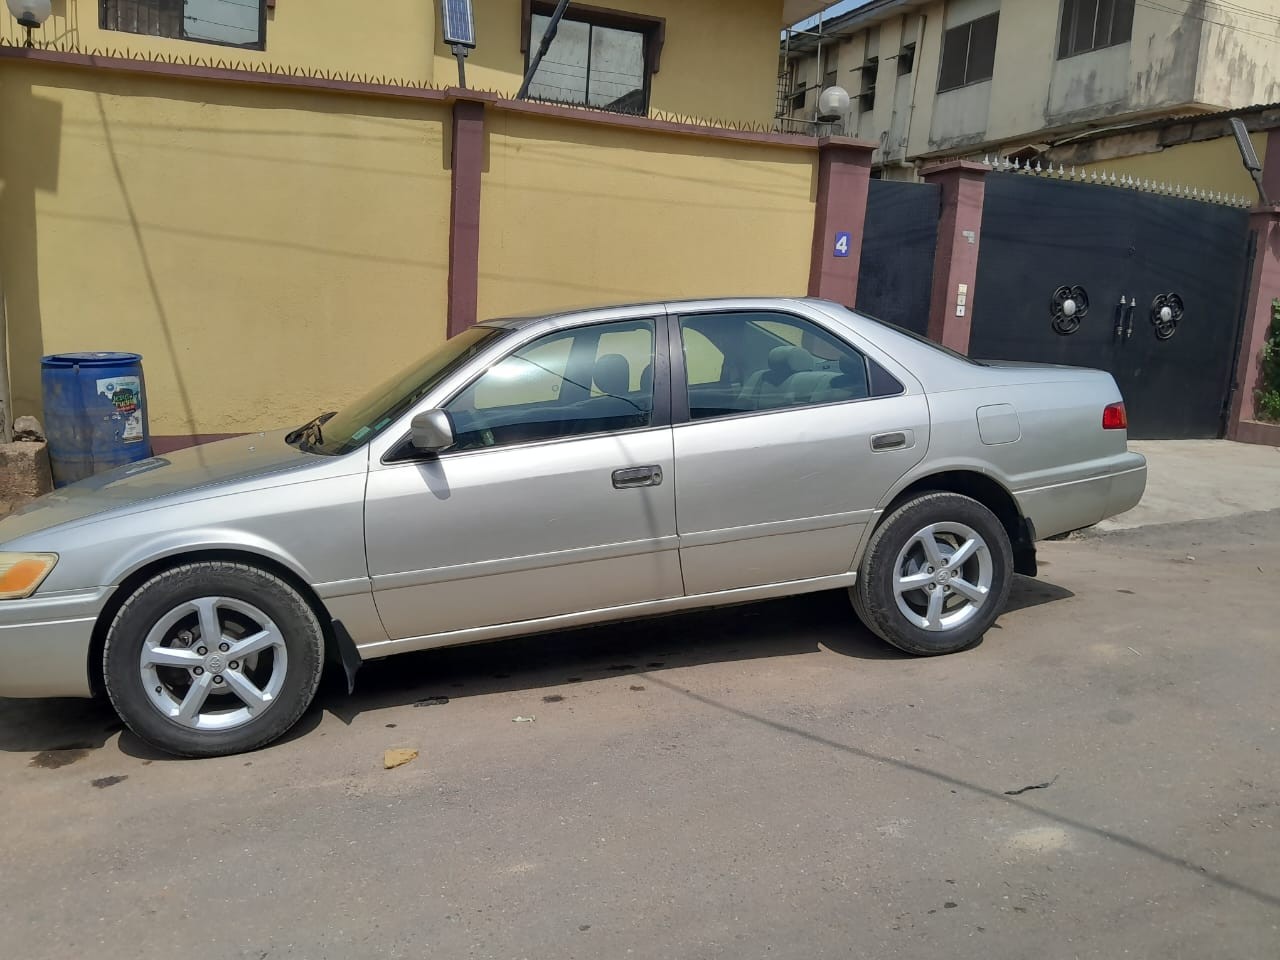 Toyota Camry 2000 is available at Efritin